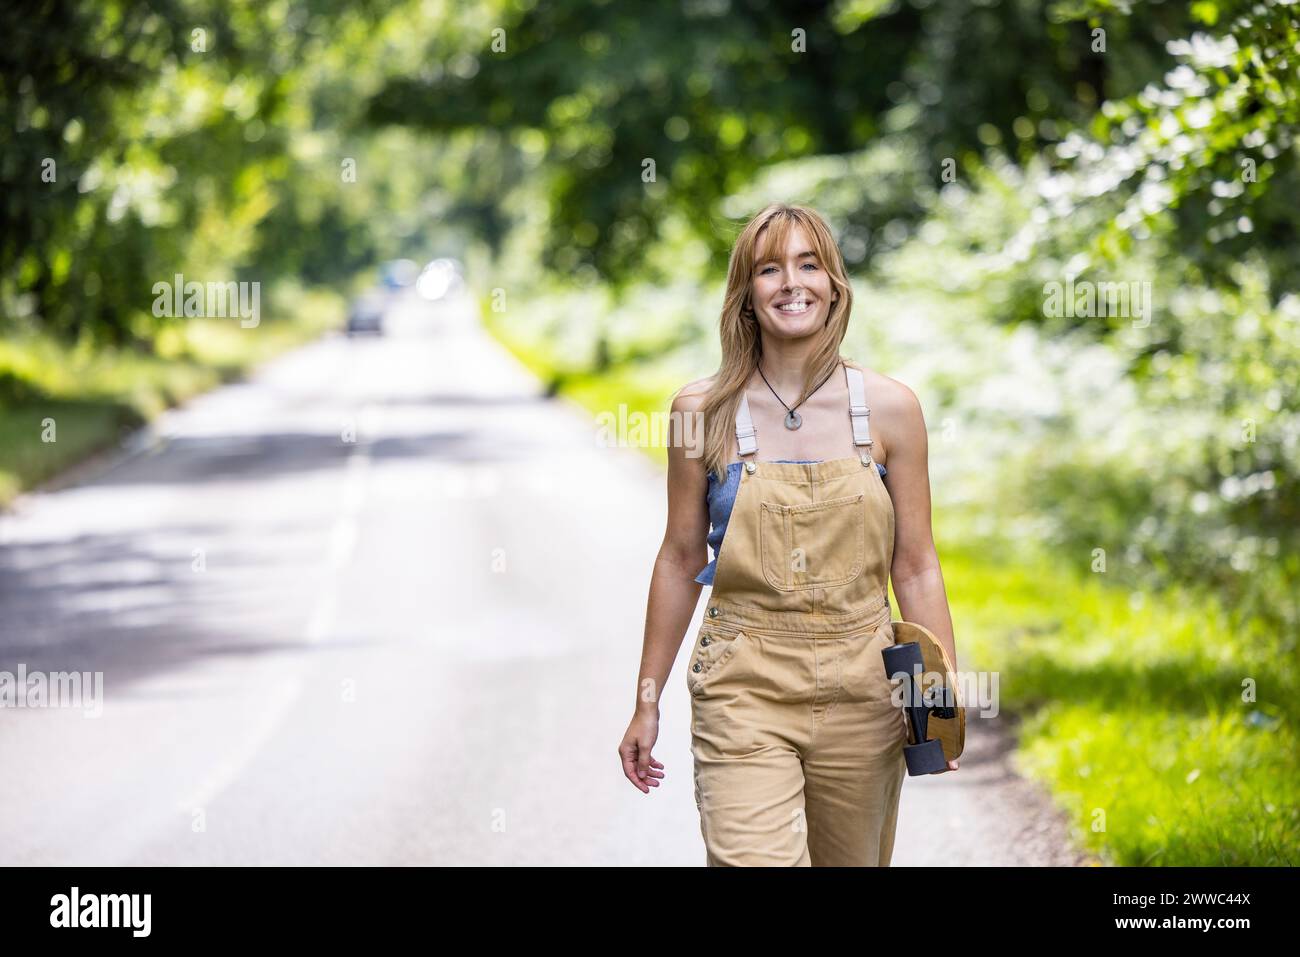 Happy woman walking with skateboard in forest Stock Photo